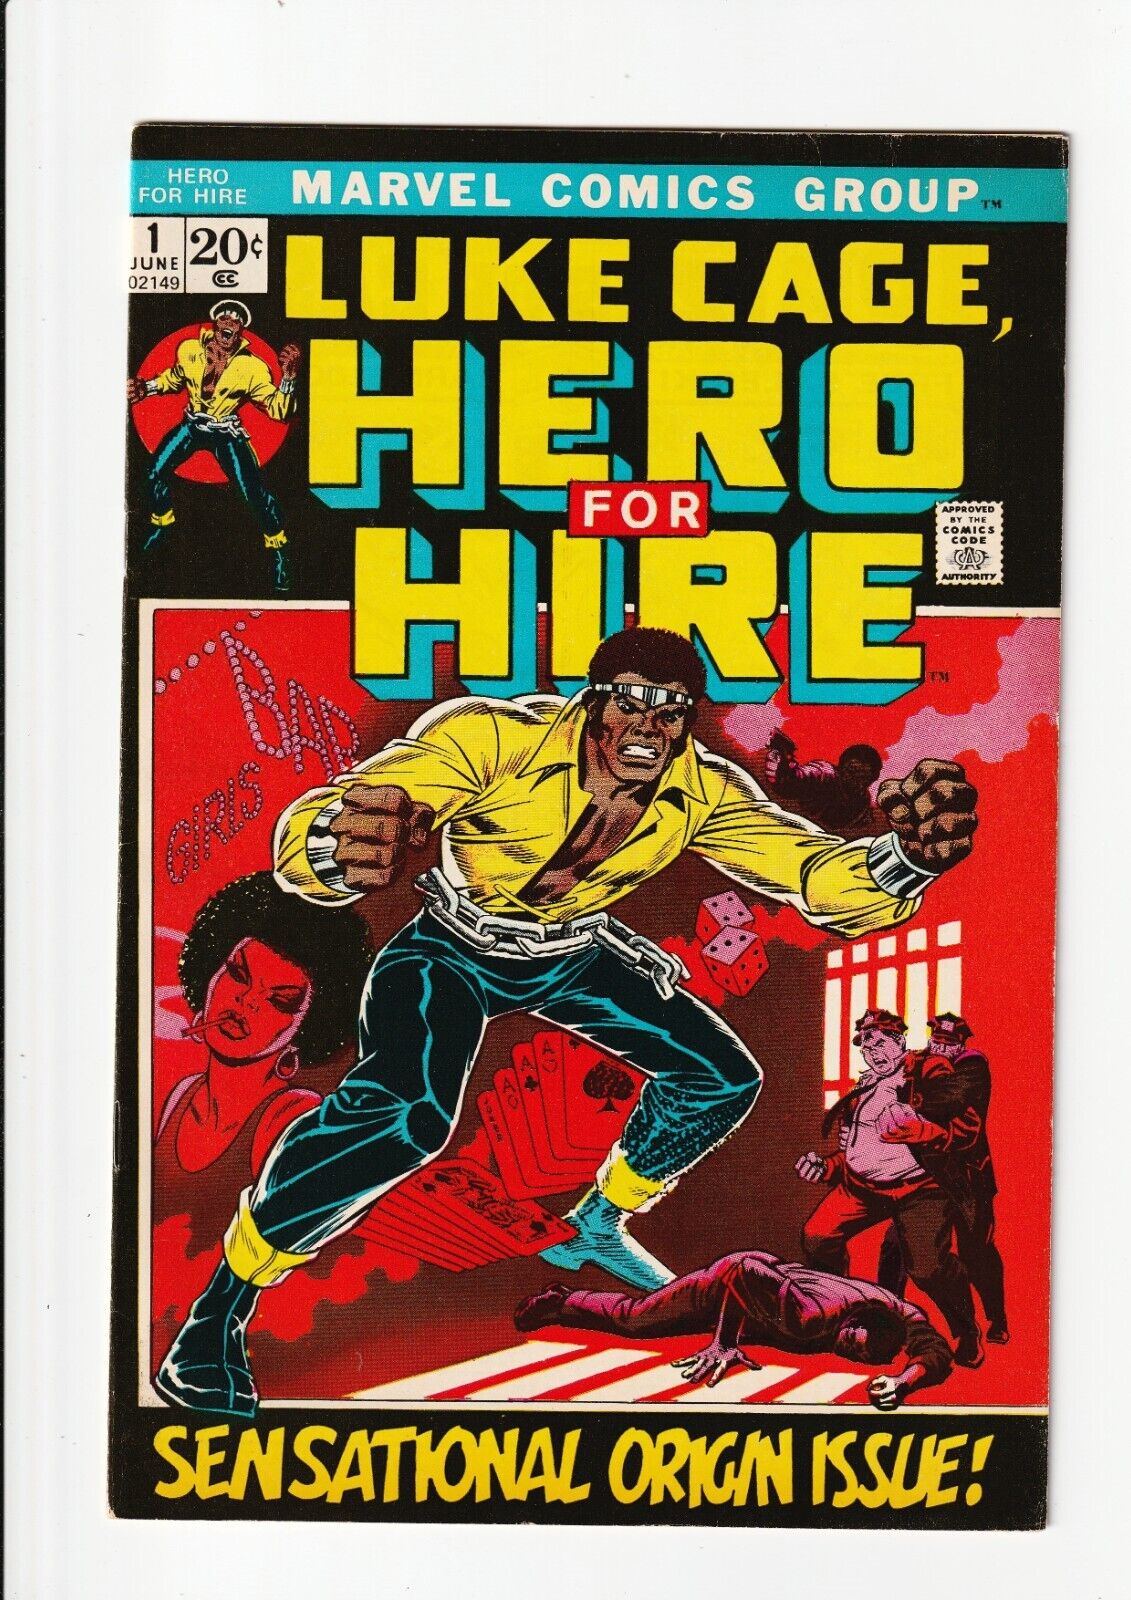 Hero for Hire #1 1972 1st Print LUKE CAGE Marvel 1972 VFNM 9.0 WHITE PAGES BEAUT